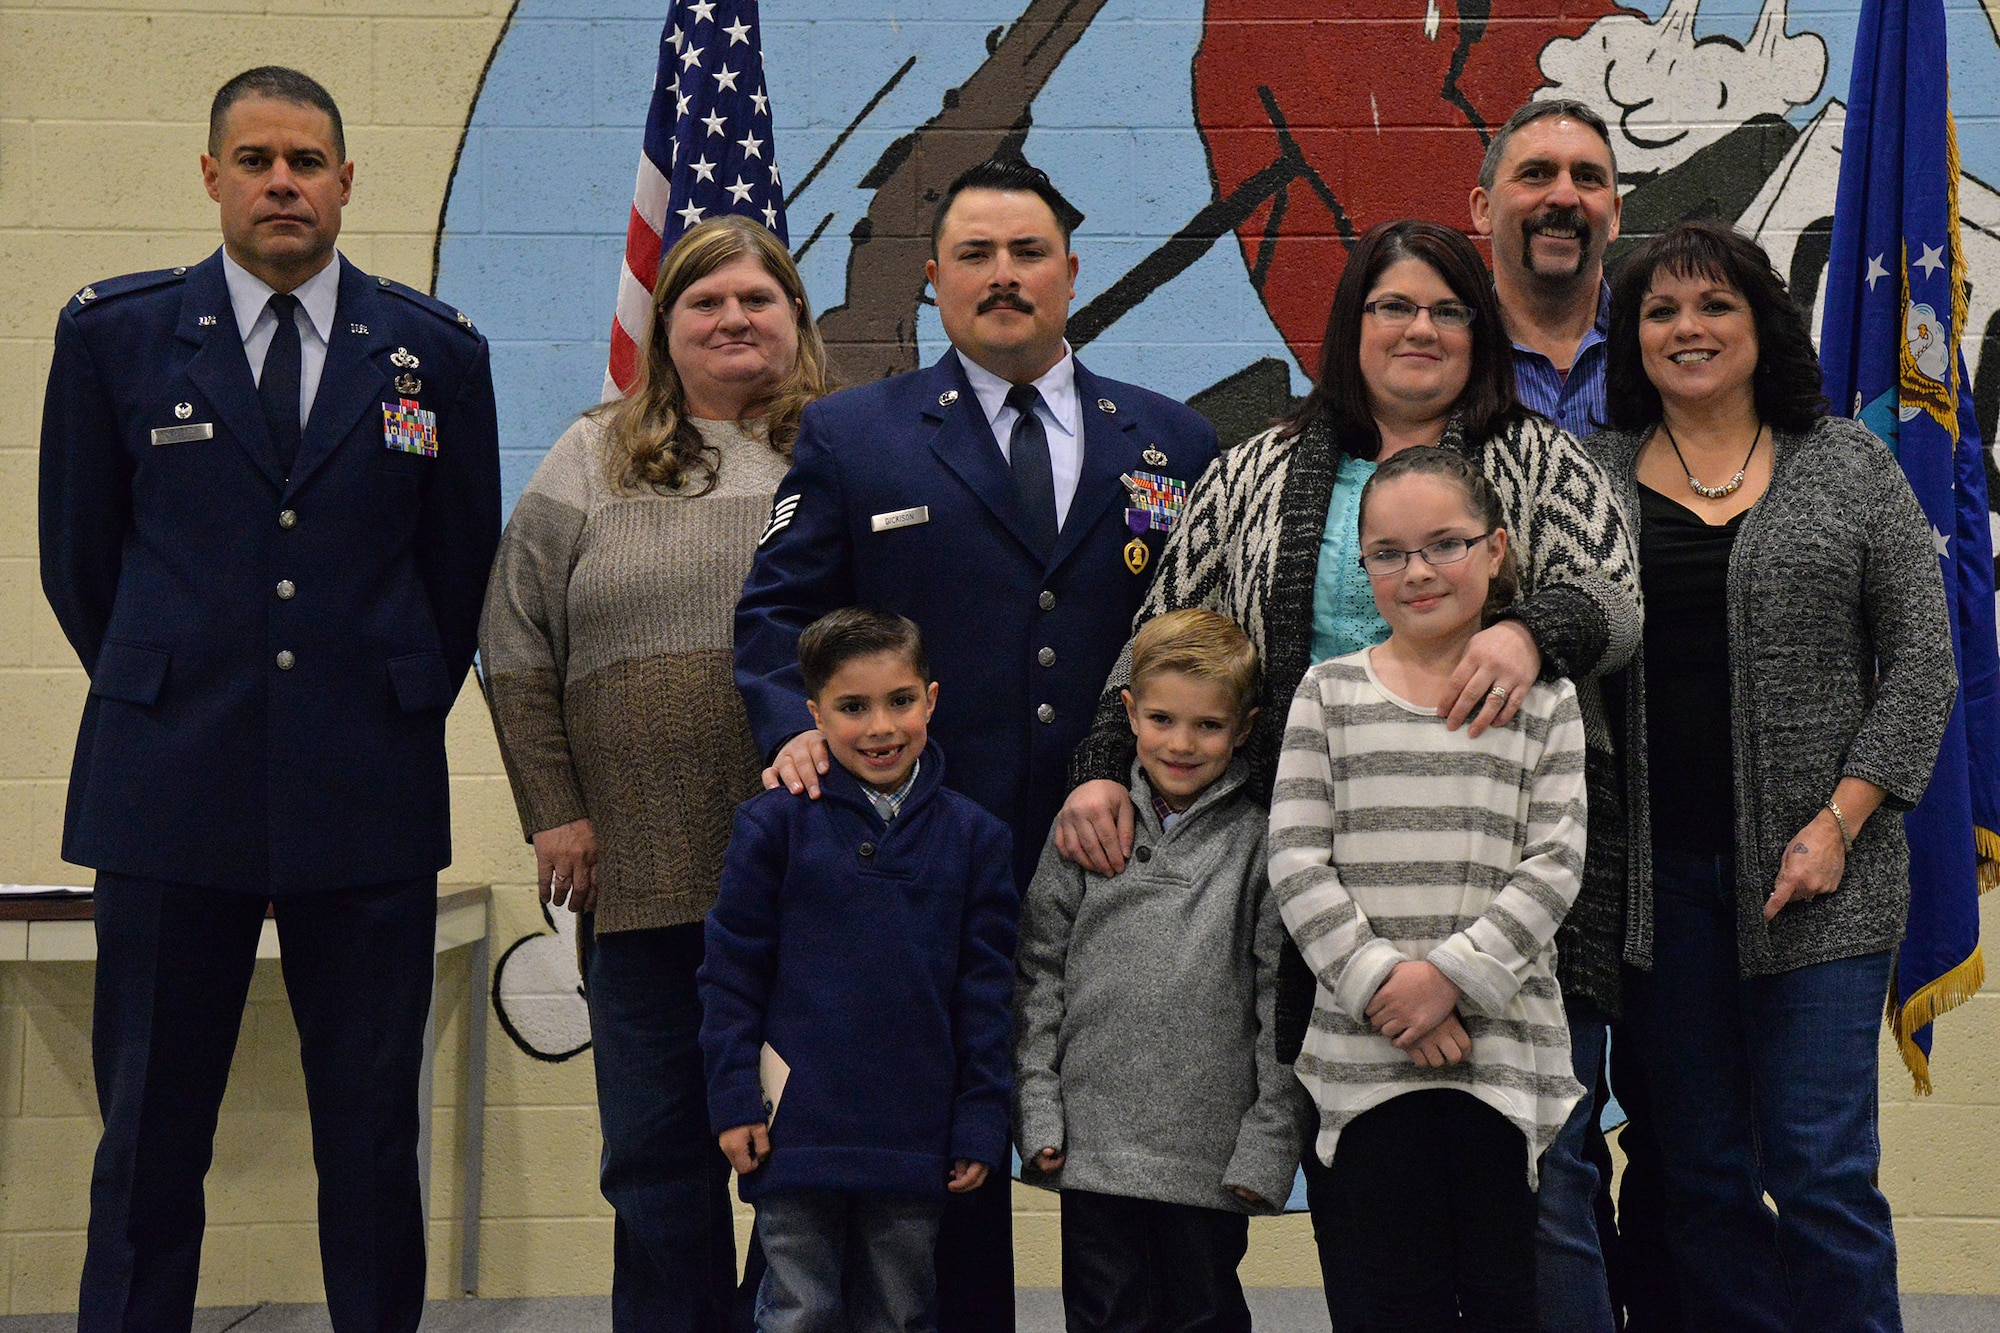 Staff Sgt. Joseph Dickison, 819th RED HORSE Squadron heating, ventilation and air conditioning technician, center, poses with his family and Col. Jose Rivera, 819th RHS commander, after a Purple Heart medal ceremony Dec. 9, 2016, at Malmstrom Air Force Base, Mont. Dickison wants to use this opportunity to spread awareness about the relation between post-traumatic stress disorder and traumatic brain injury and help other people through hard situations where sometimes they may feel they are alone. (U.S. Air Force photo/Airman 1st Class Daniel Brosam)